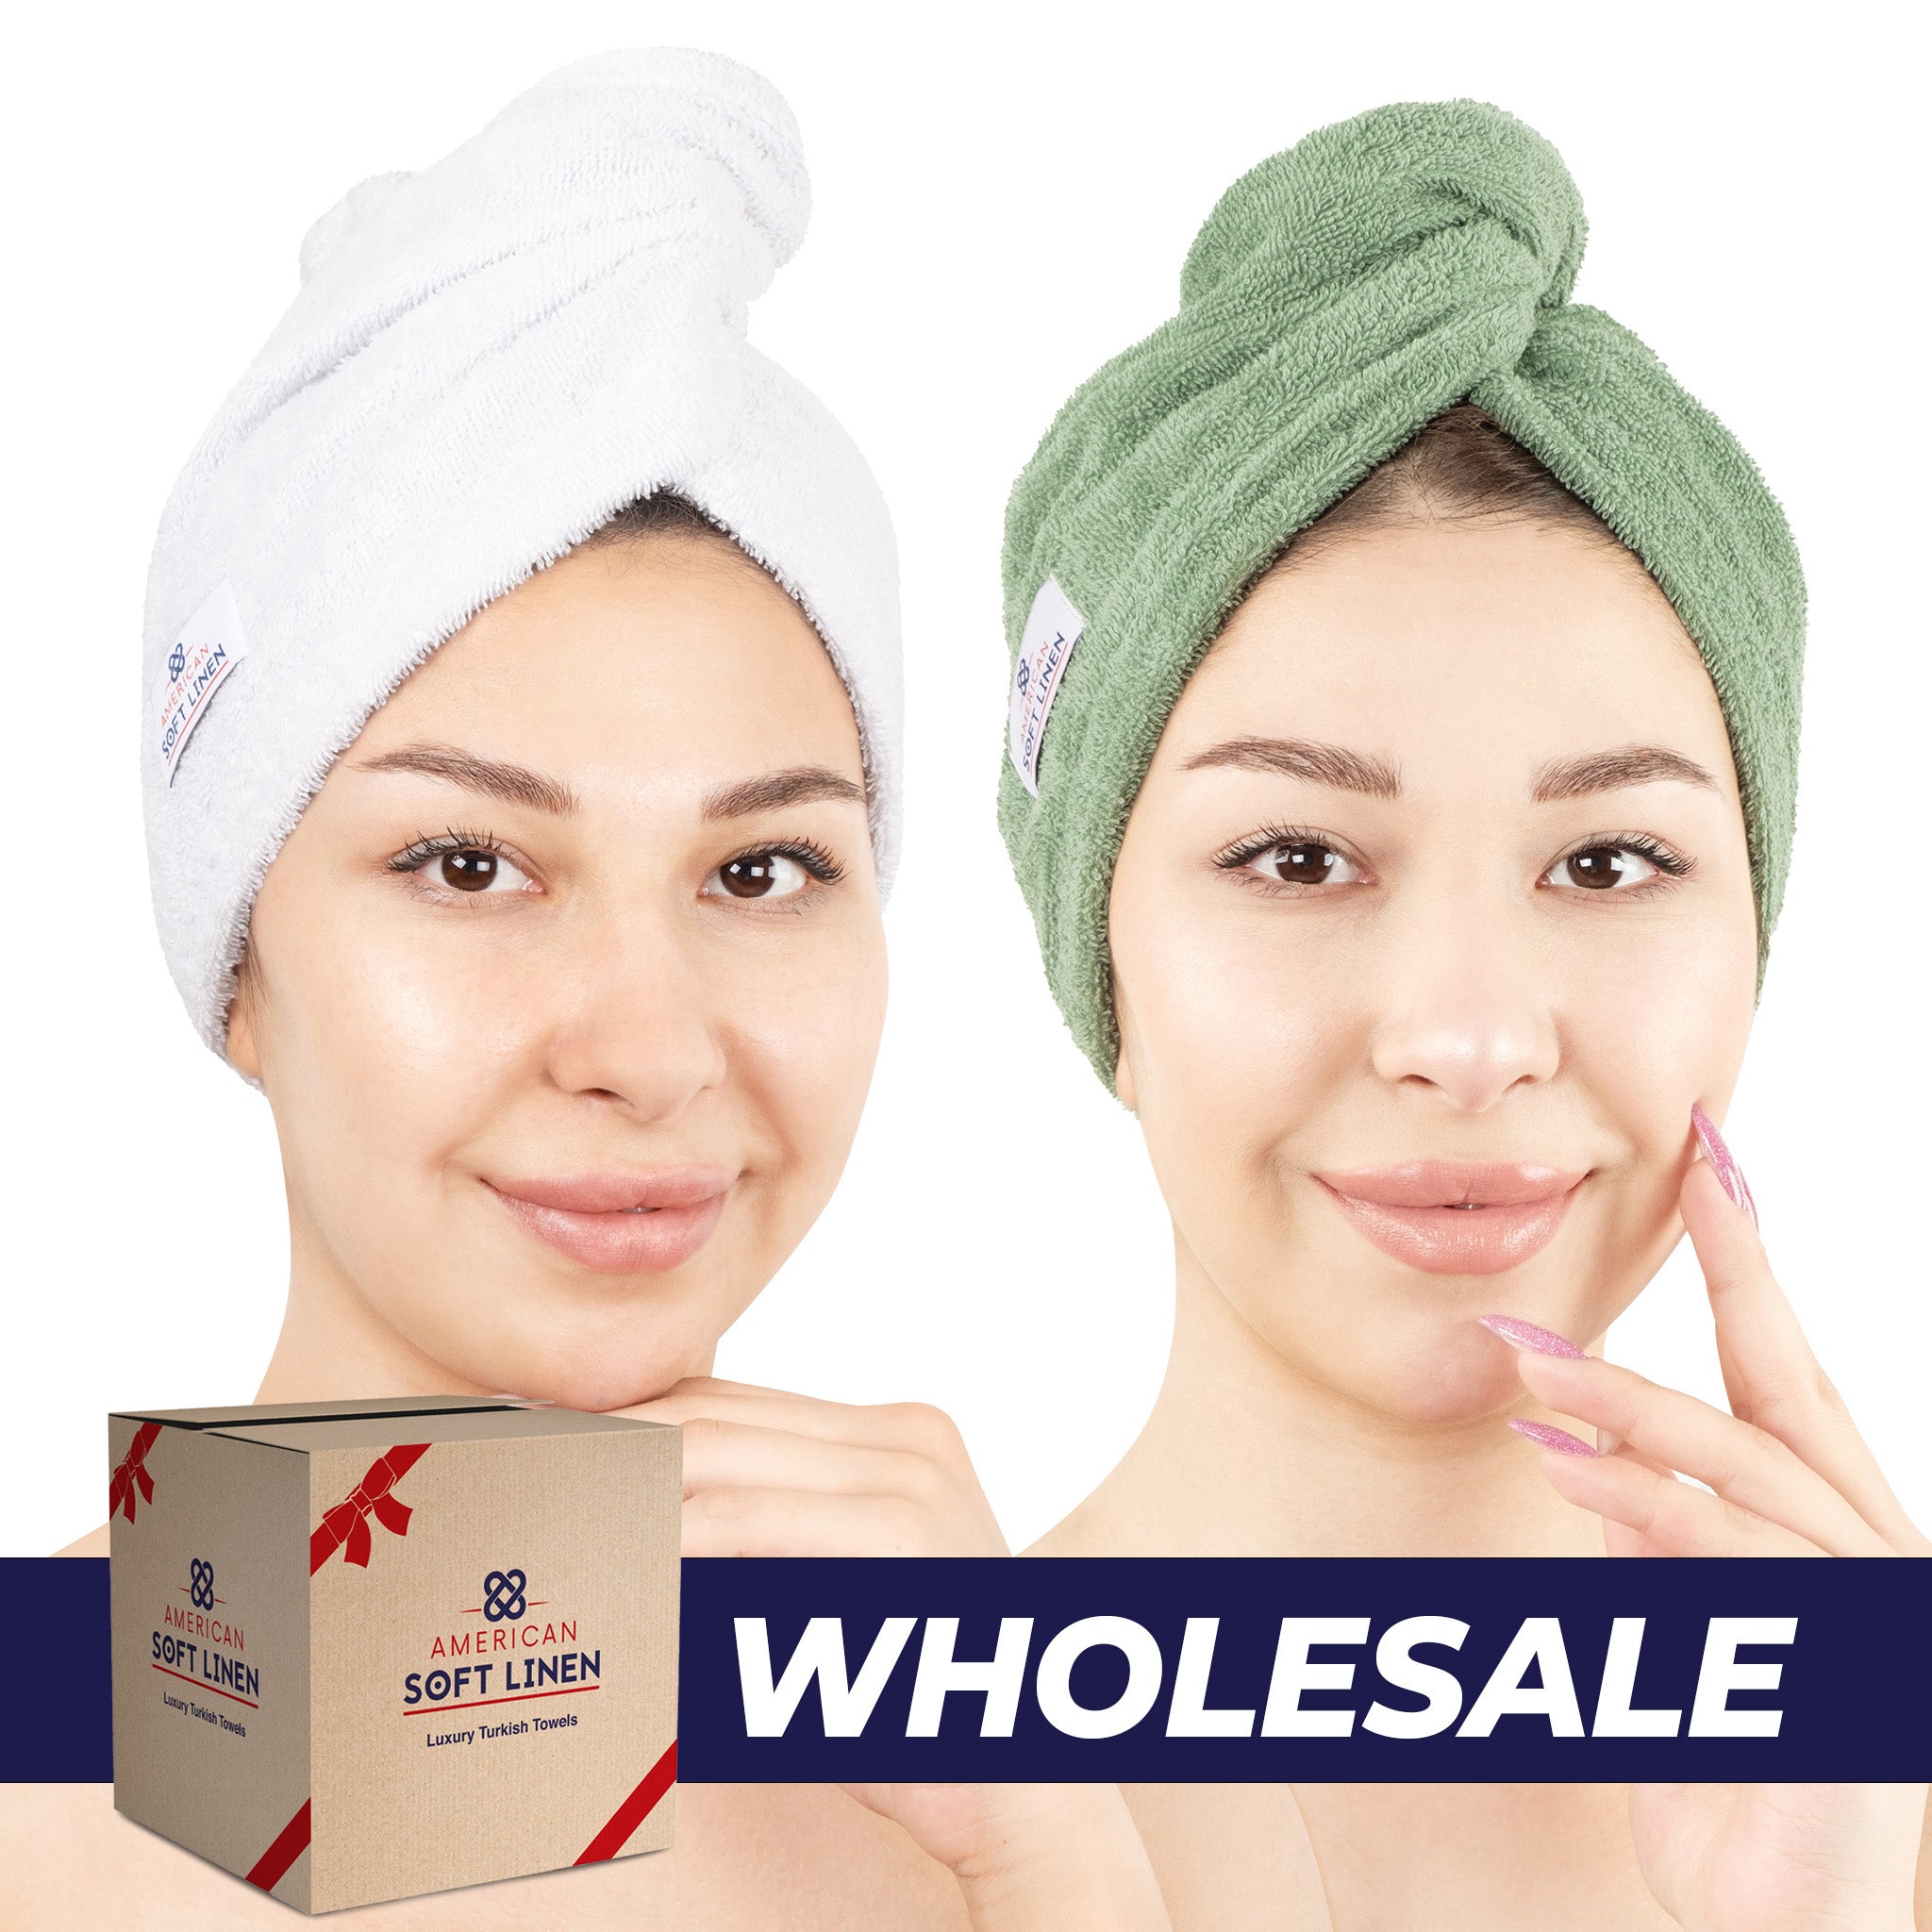 American Soft Linen 100% Cotton Hair Drying Towels for Women 2 pack 75 set case pack white-sage green-0